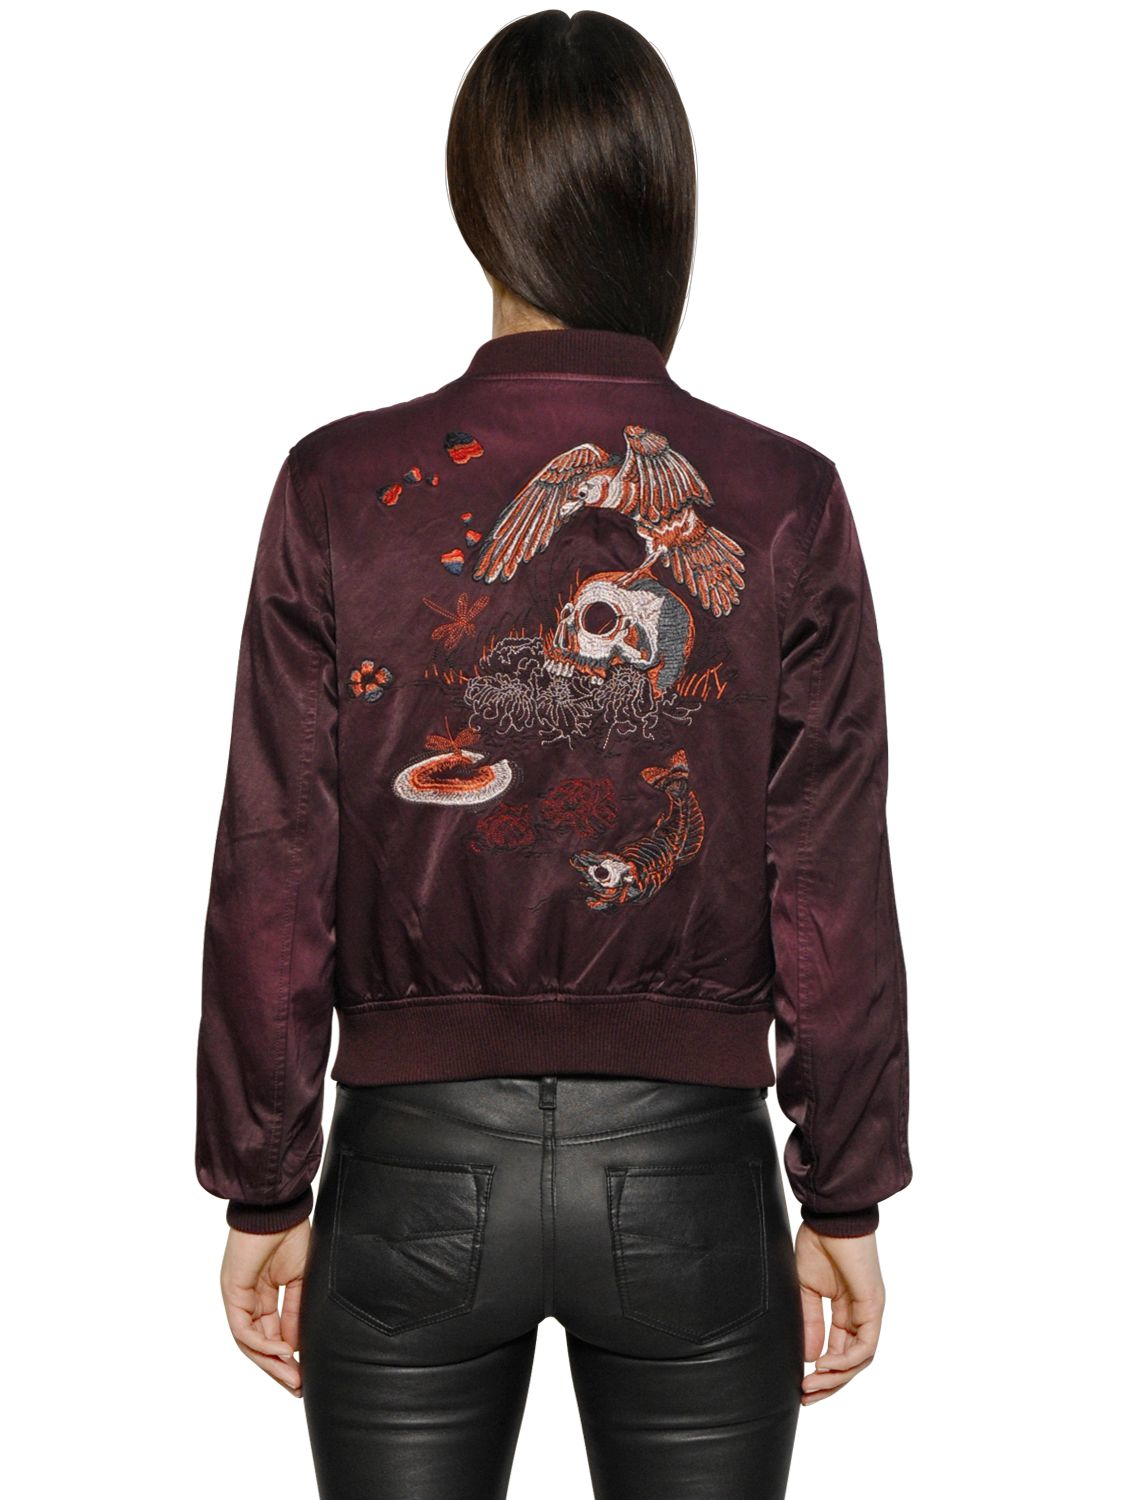 Lyst - Diesel Embroidered Satin Bomber Jacket in Purple